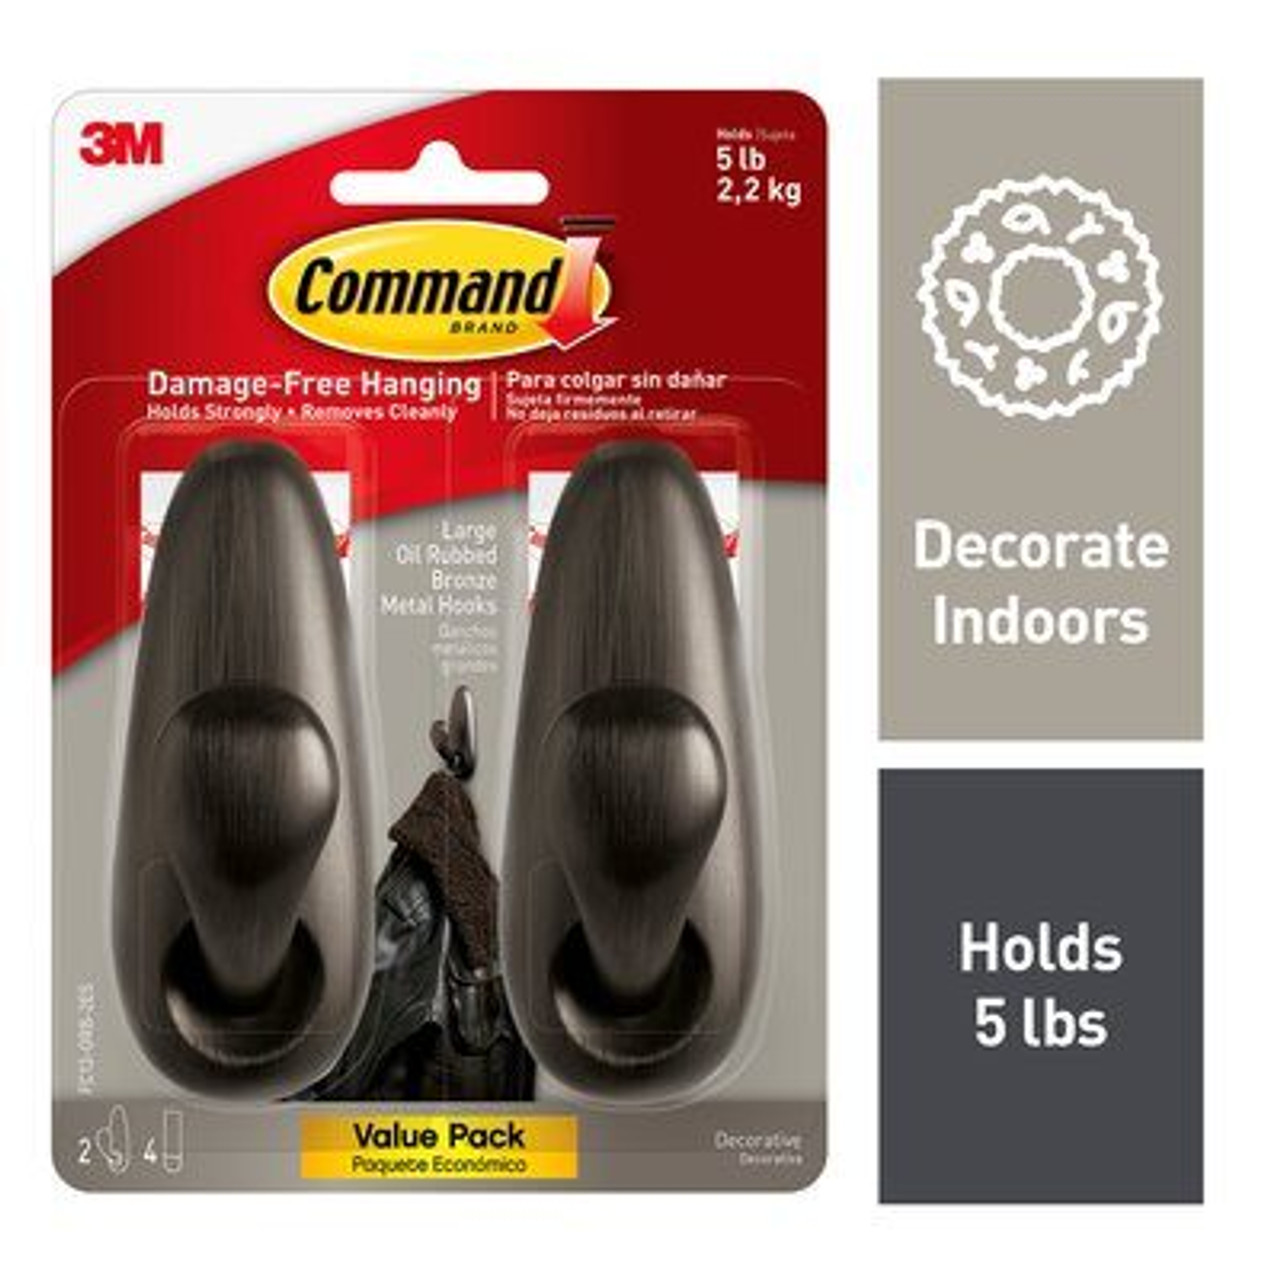 Command™ Large Forever Classic Oil Rubbed Bronze Metal Hook, FC13-ORB-2ES, 2 Pack